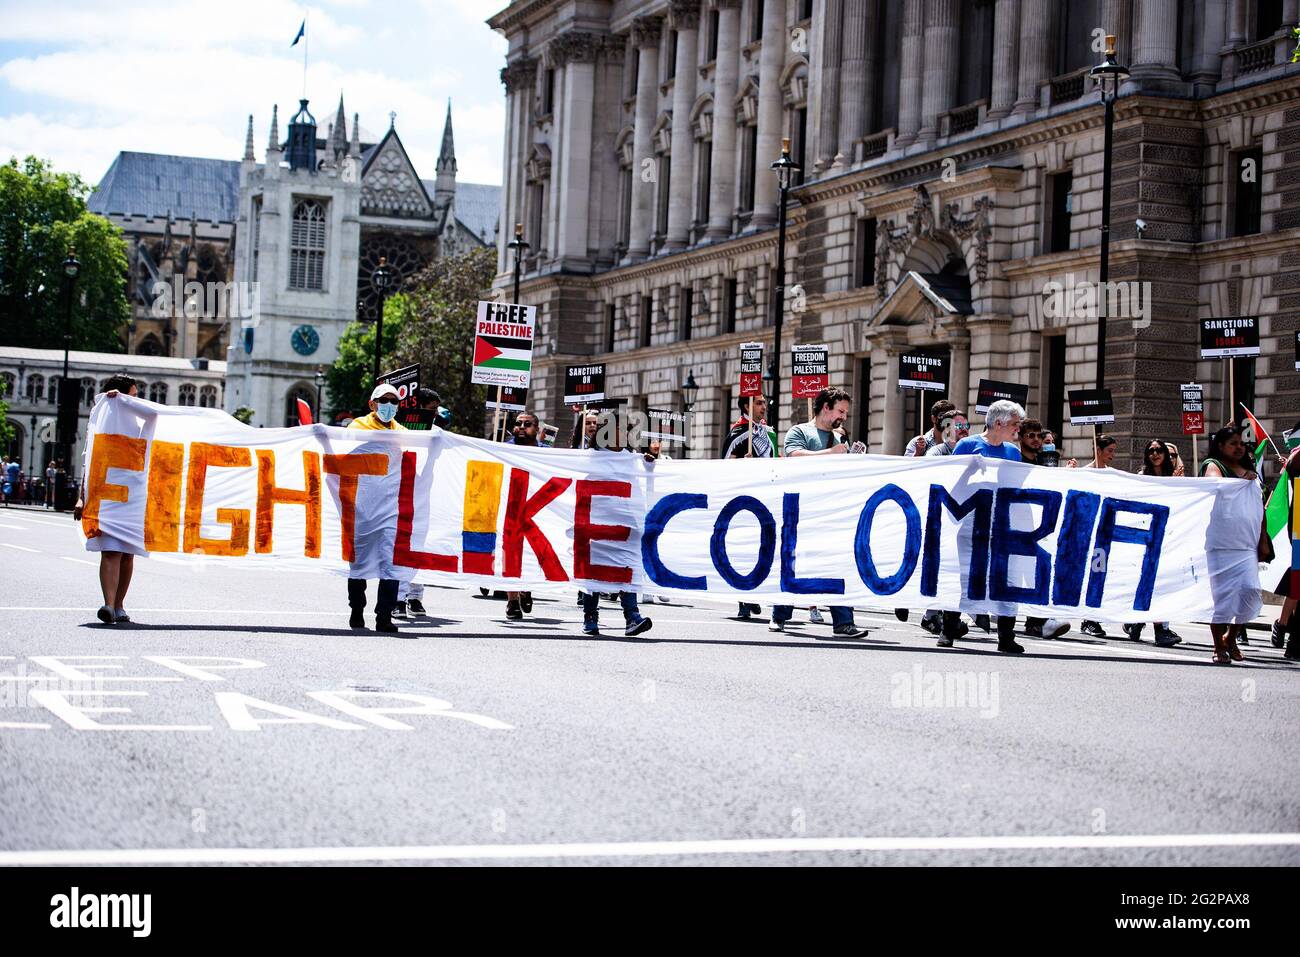 London Uk 12th June 21 Protesters March Along Whitehall While Holding A Large Banner Saying Fight Like Colombia During A Demonstration Demanding Justice For Palestine Since May 21 Israel Launched 11 Day Aerial